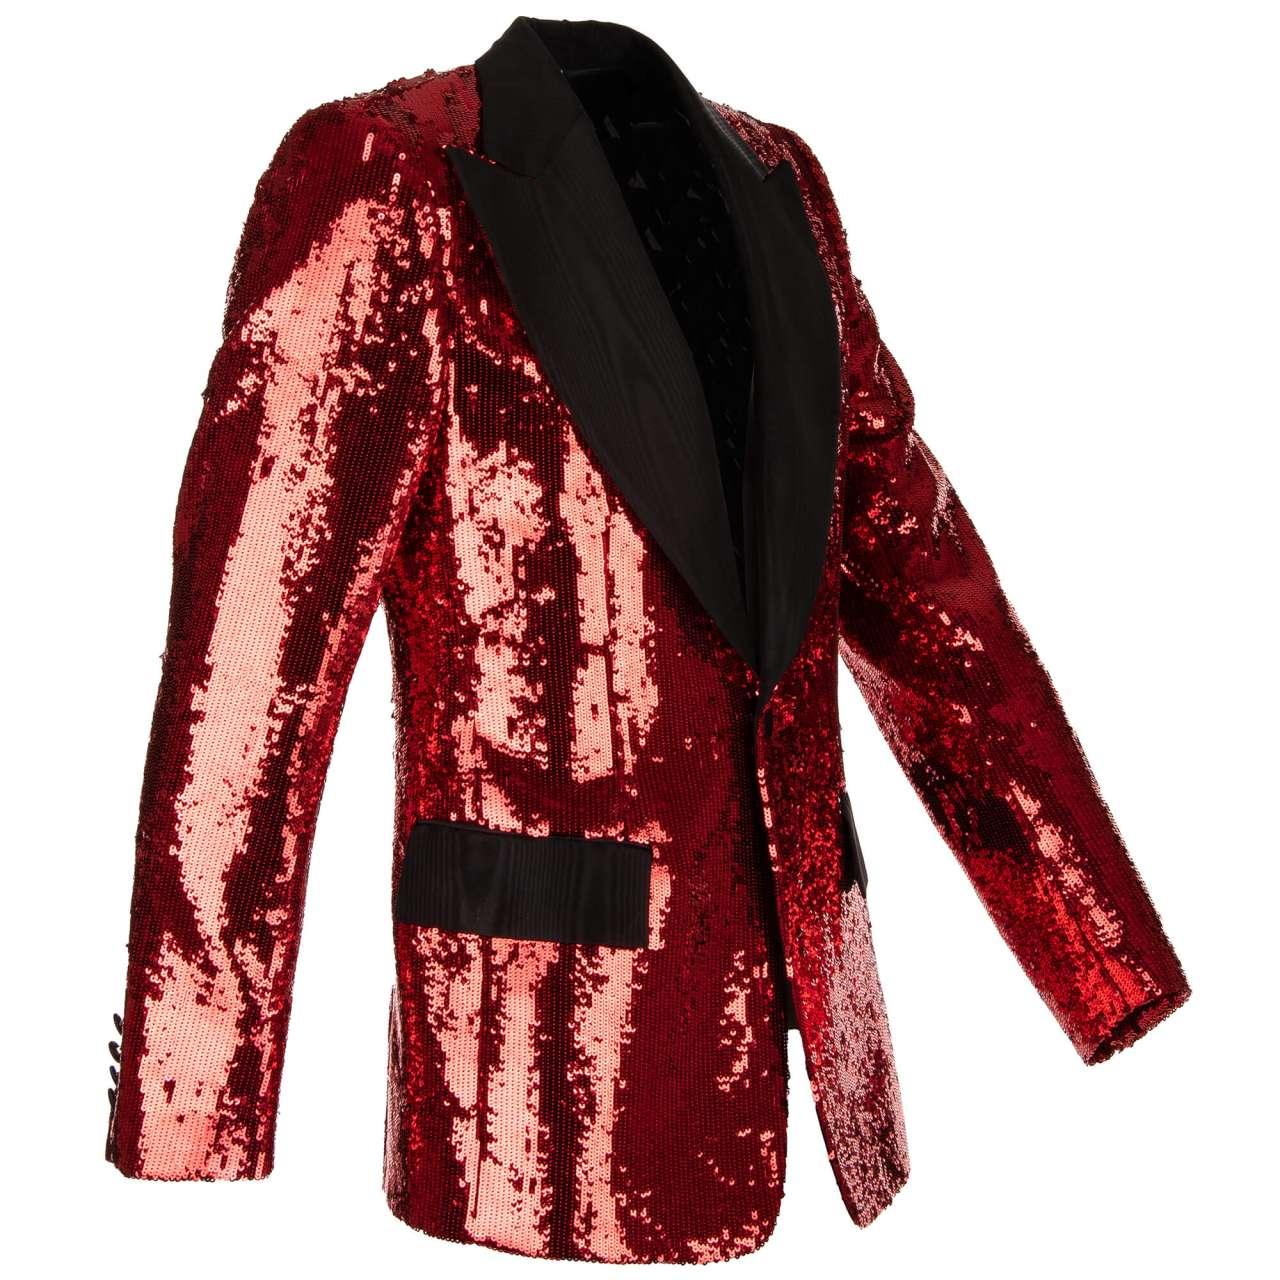 Dolce & Gabbana - Sequined Tuxedo Blazer with Moire Lapel Red Black 50 In Excellent Condition For Sale In Erkrath, DE